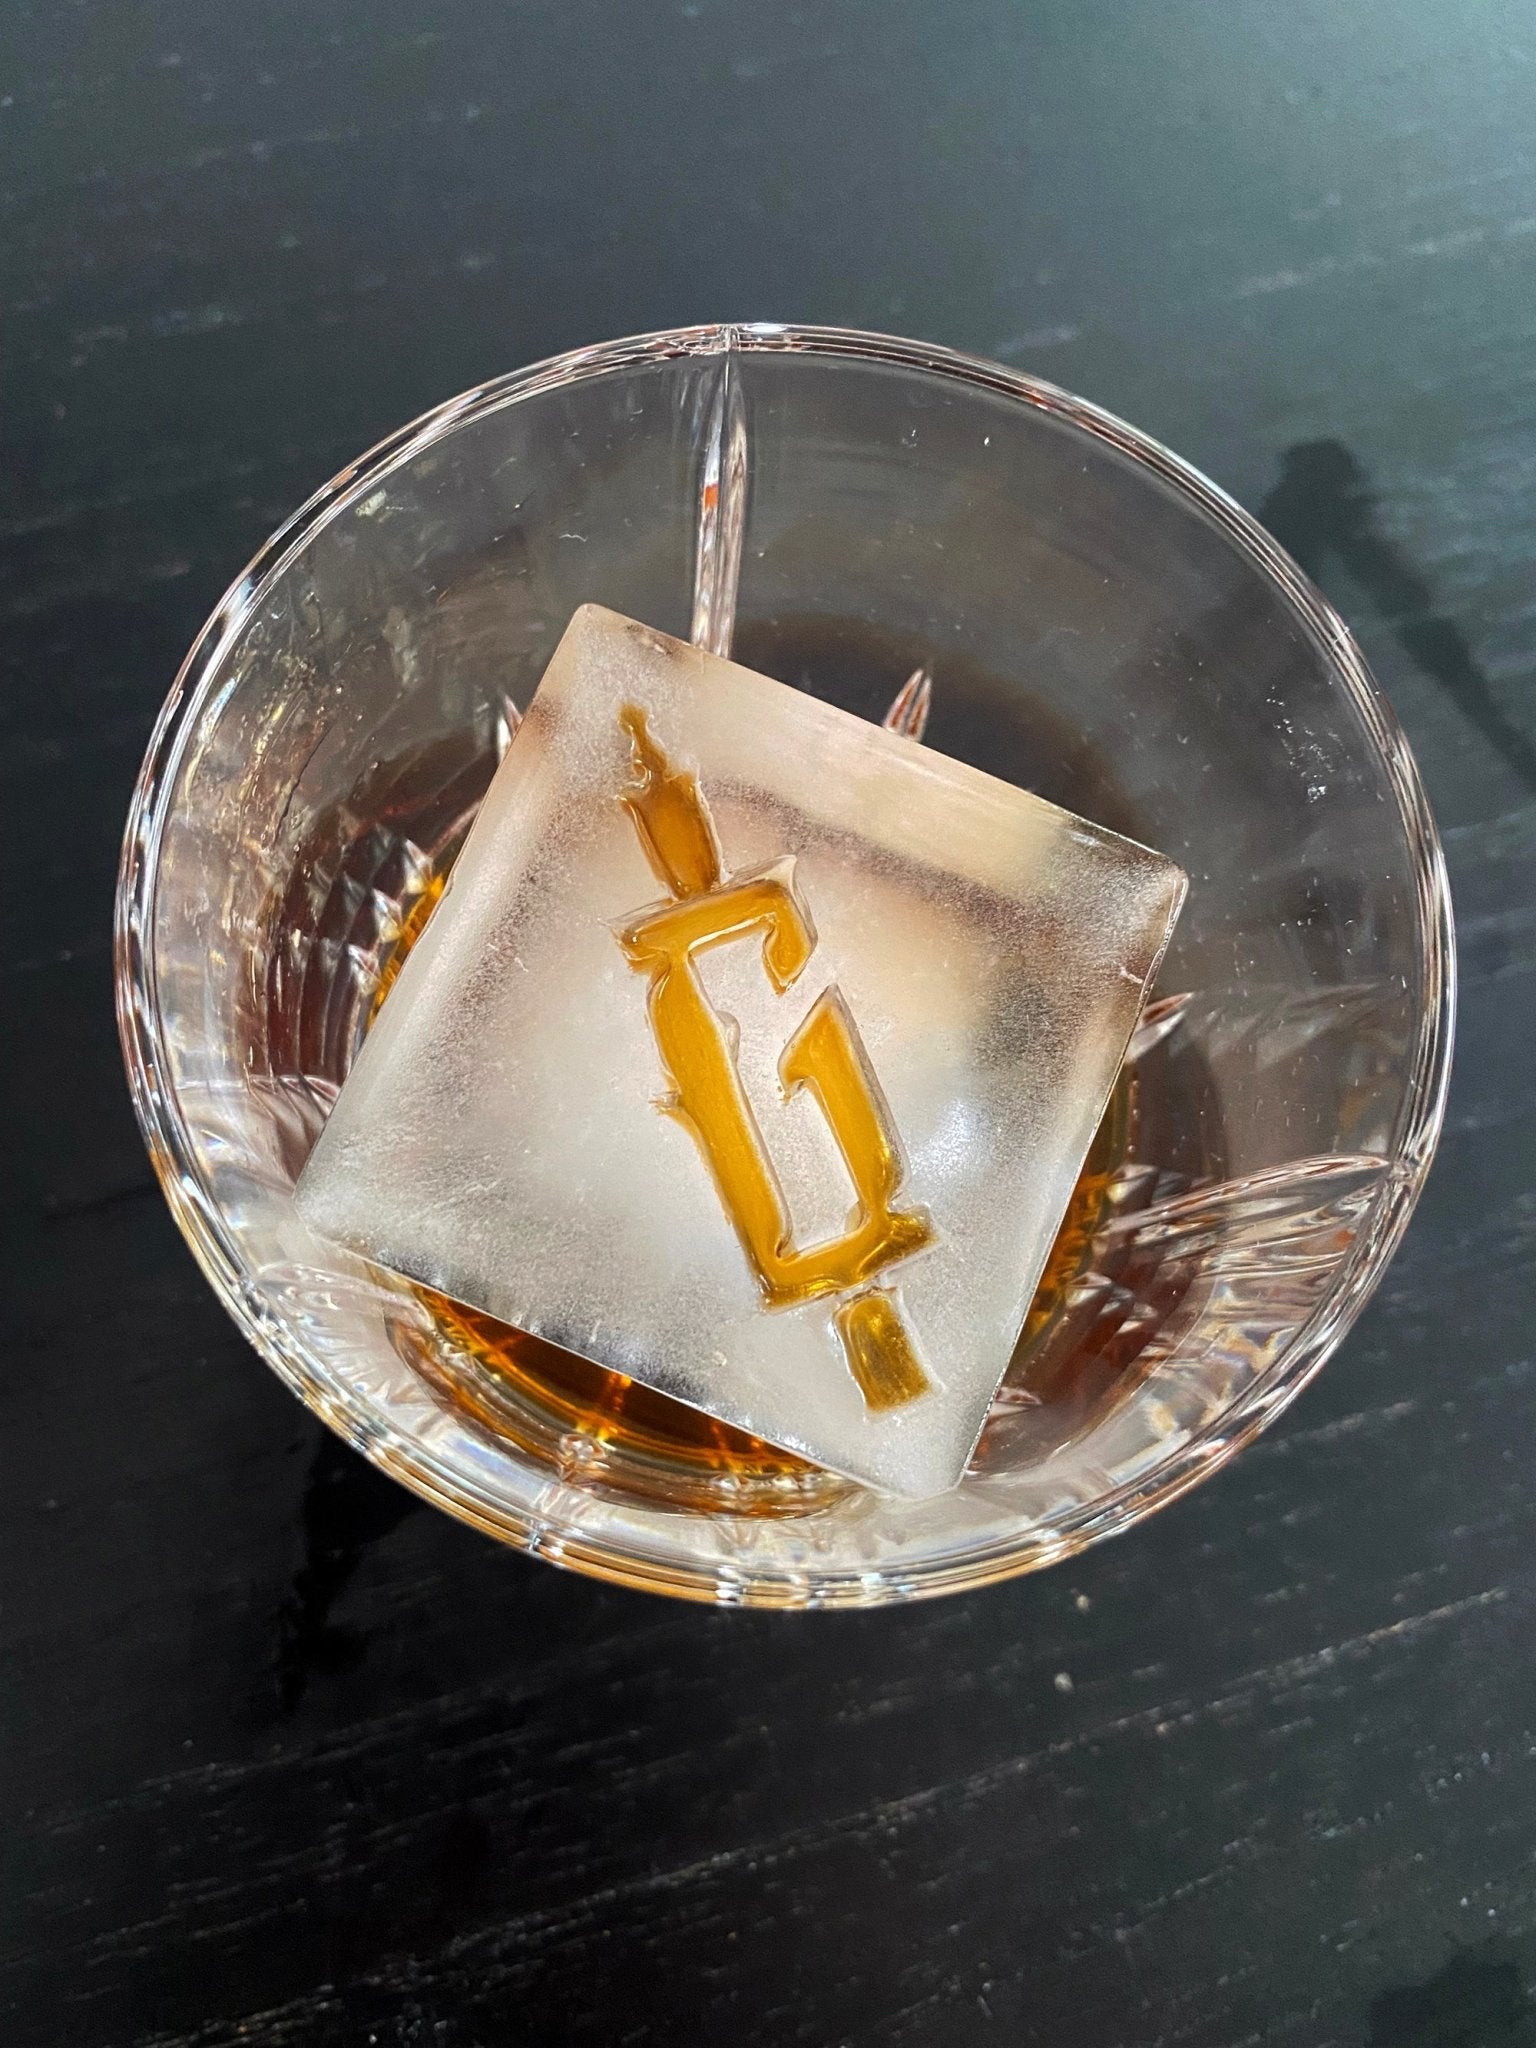 4/6/8 Designs in 1 Custom Ice Cube Tray, Ice Cube Plate, Personalized Ice  Cube Stamp, Brass Stamp for Ice, Monogram Ice Stamp 